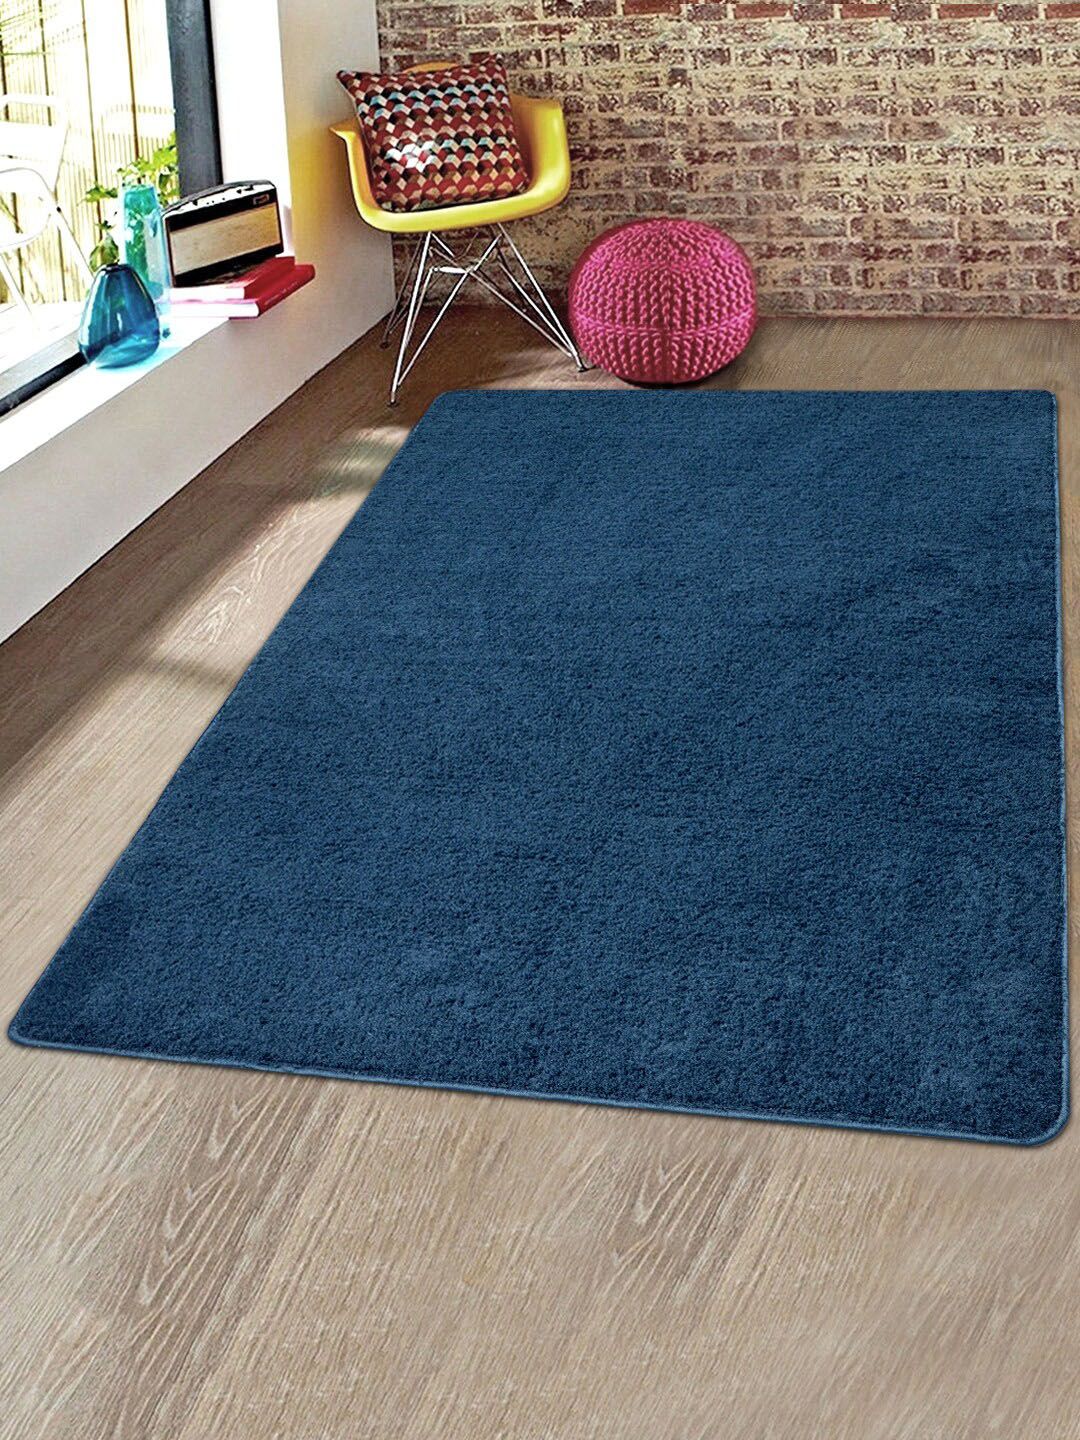 Saral Home Blue Solid Shaggy Anti-Skid Carpet Price in India